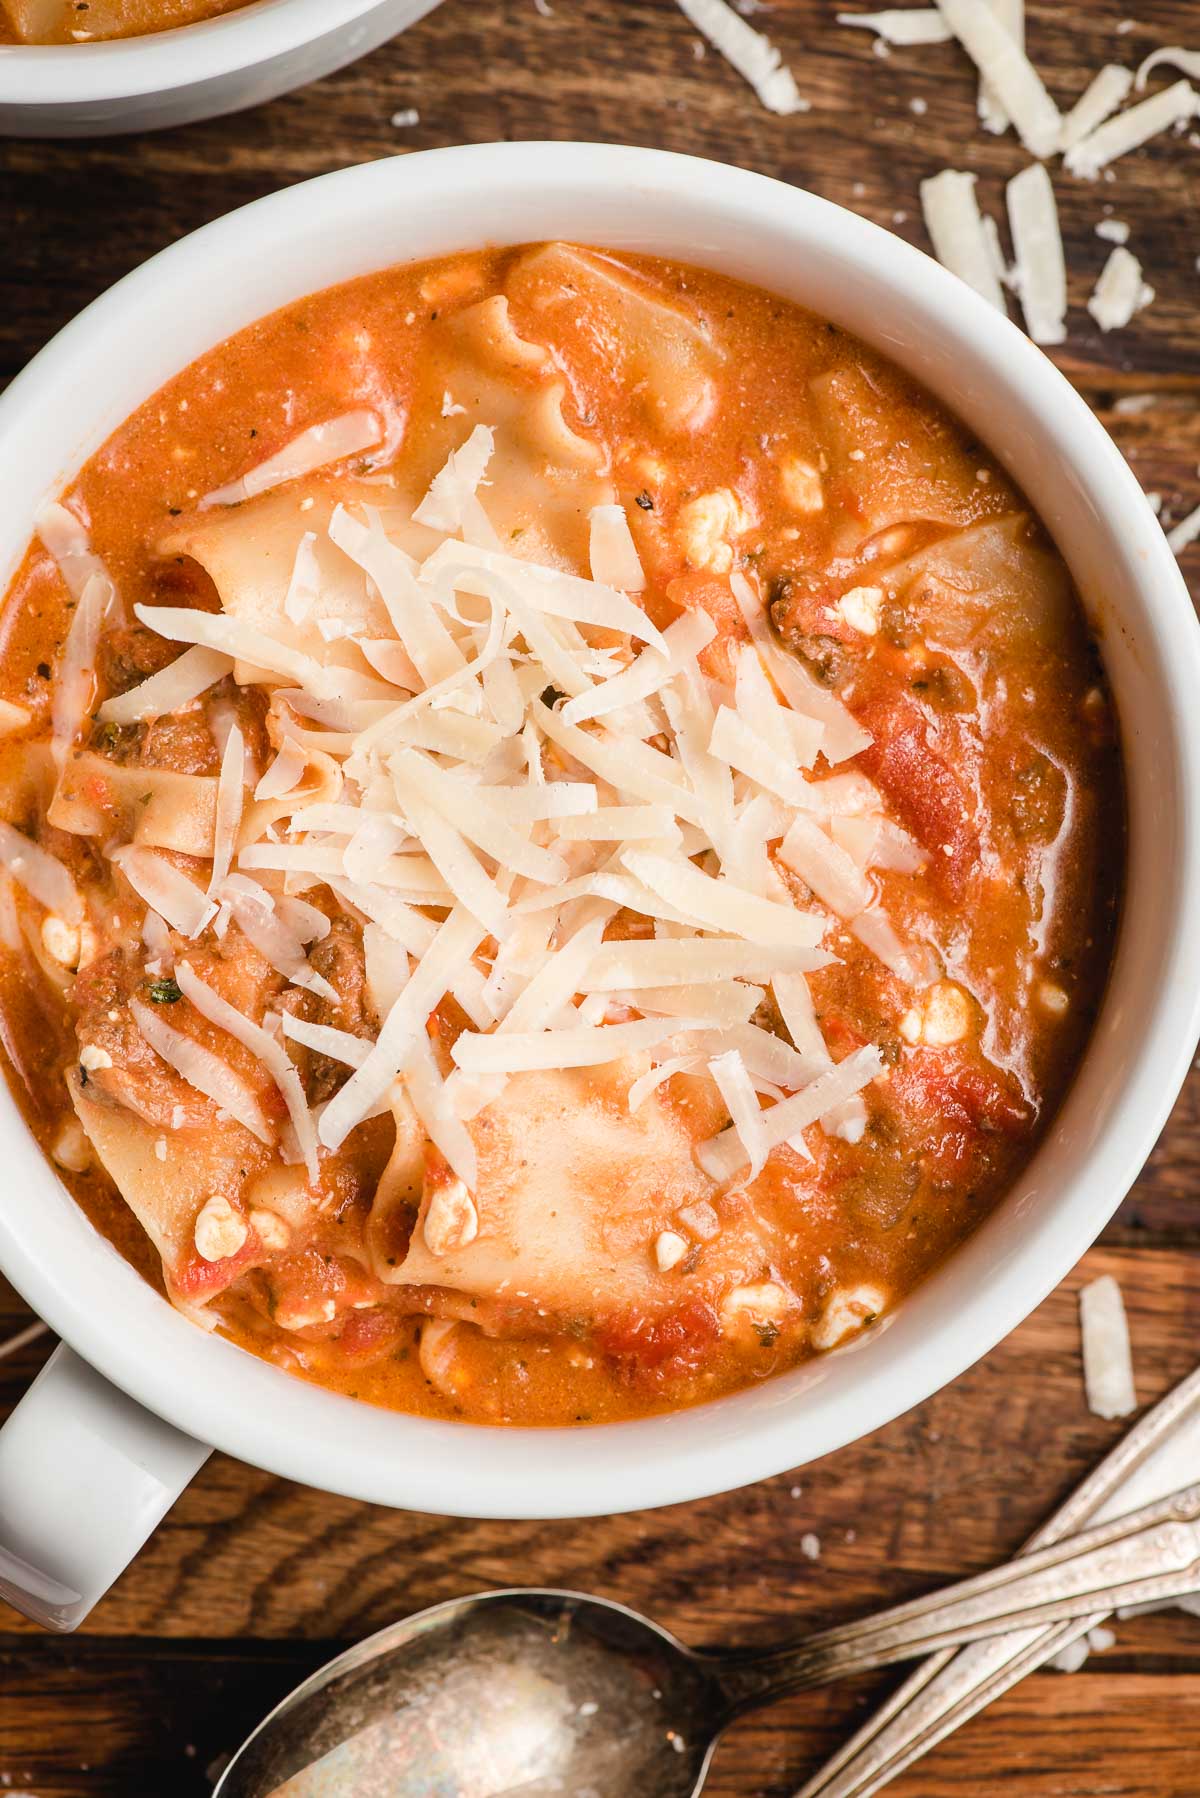 Bowl of lasagna soup with Parmesan cheese sprinkled on top.